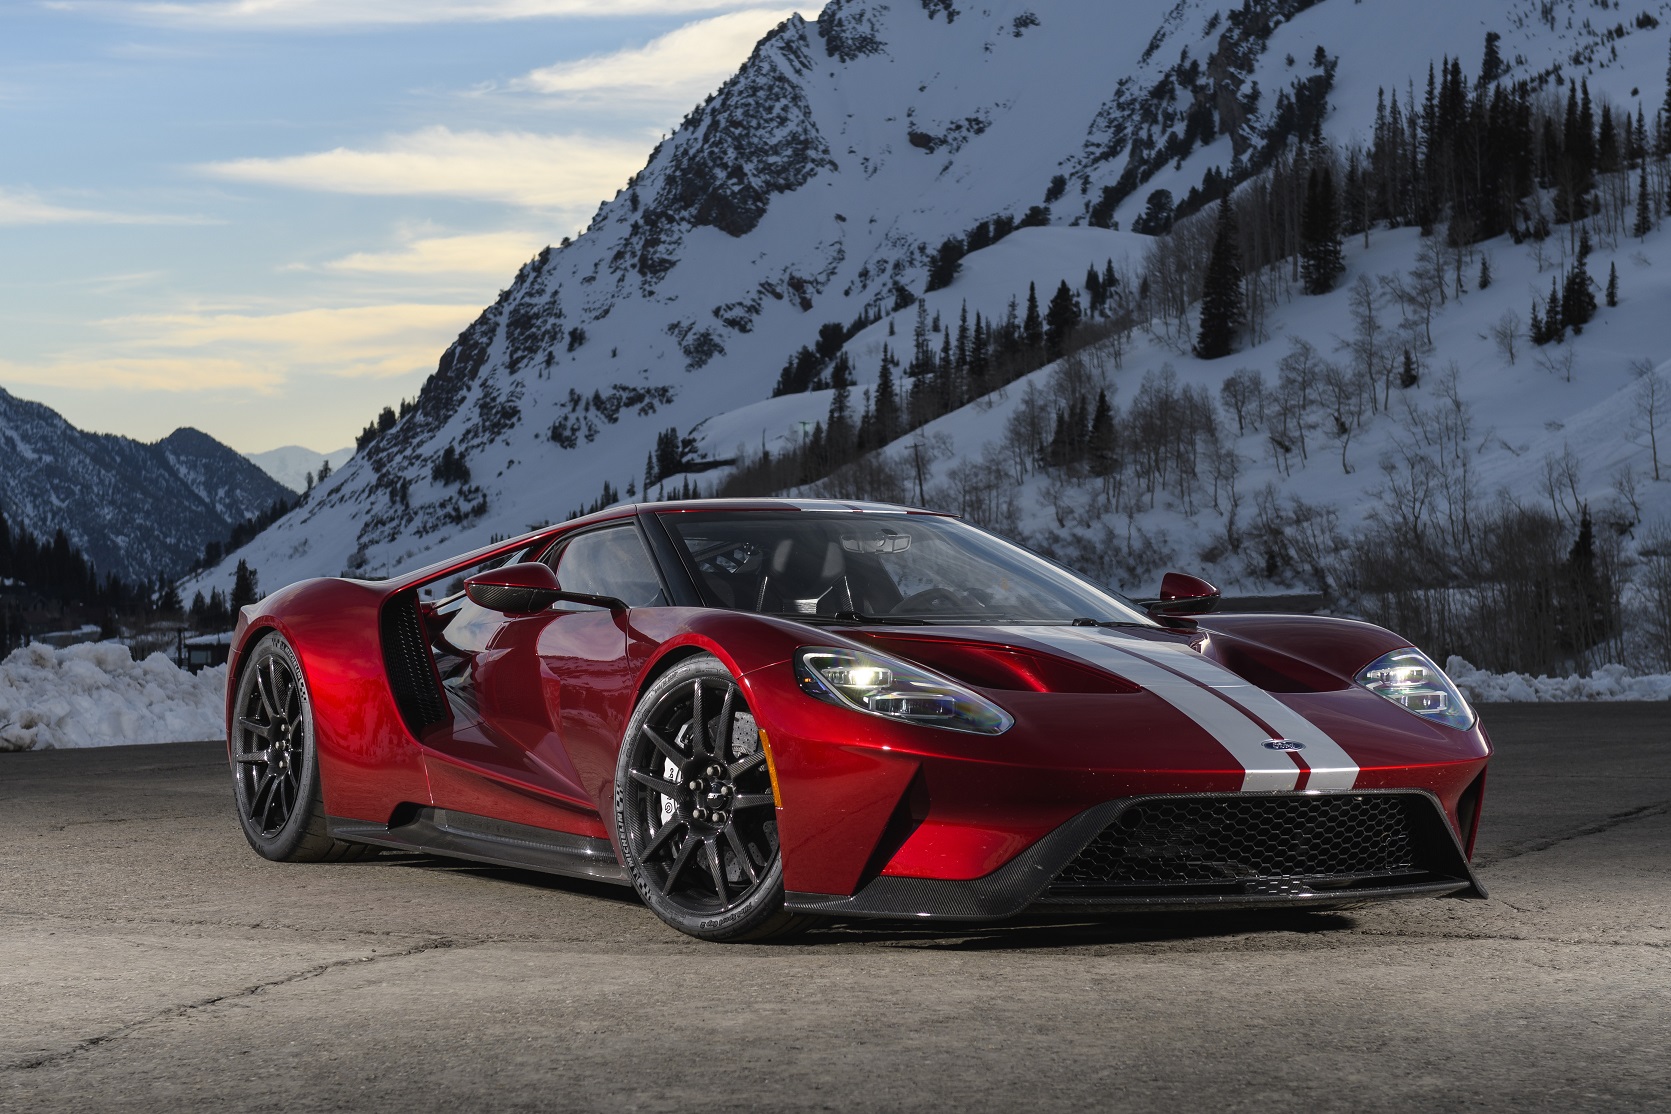 Ford Created the Ford GT Supercar to Test Technologies for Tomorrow’s Vehicles